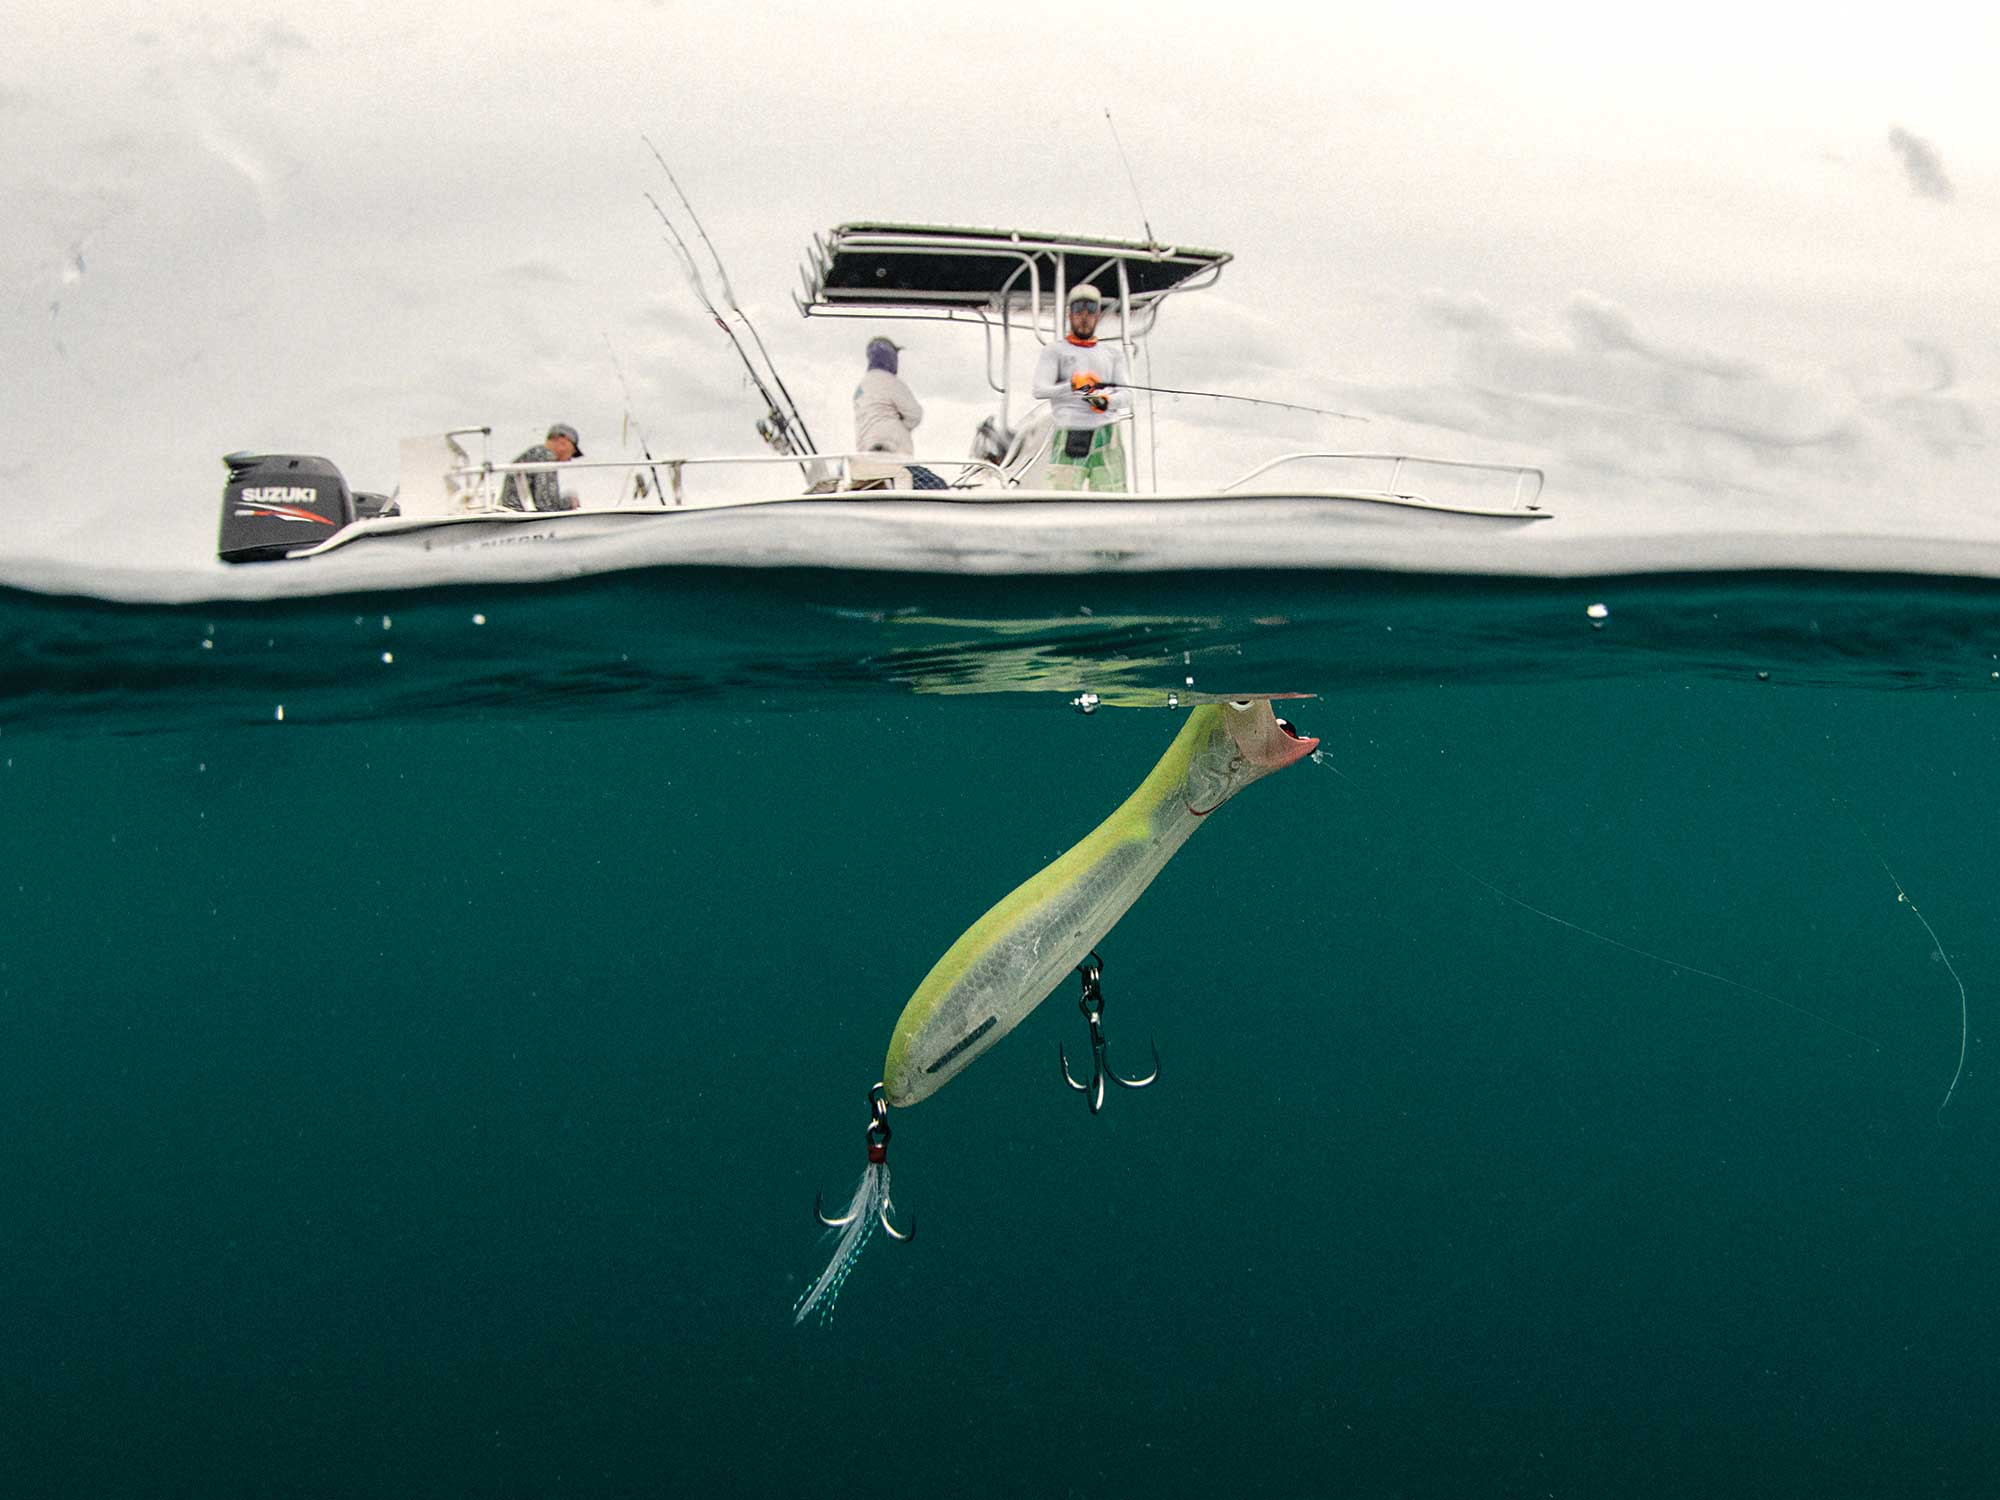 Big Bubble Trail from a Trolling Lure, Sportfishing Dragging a